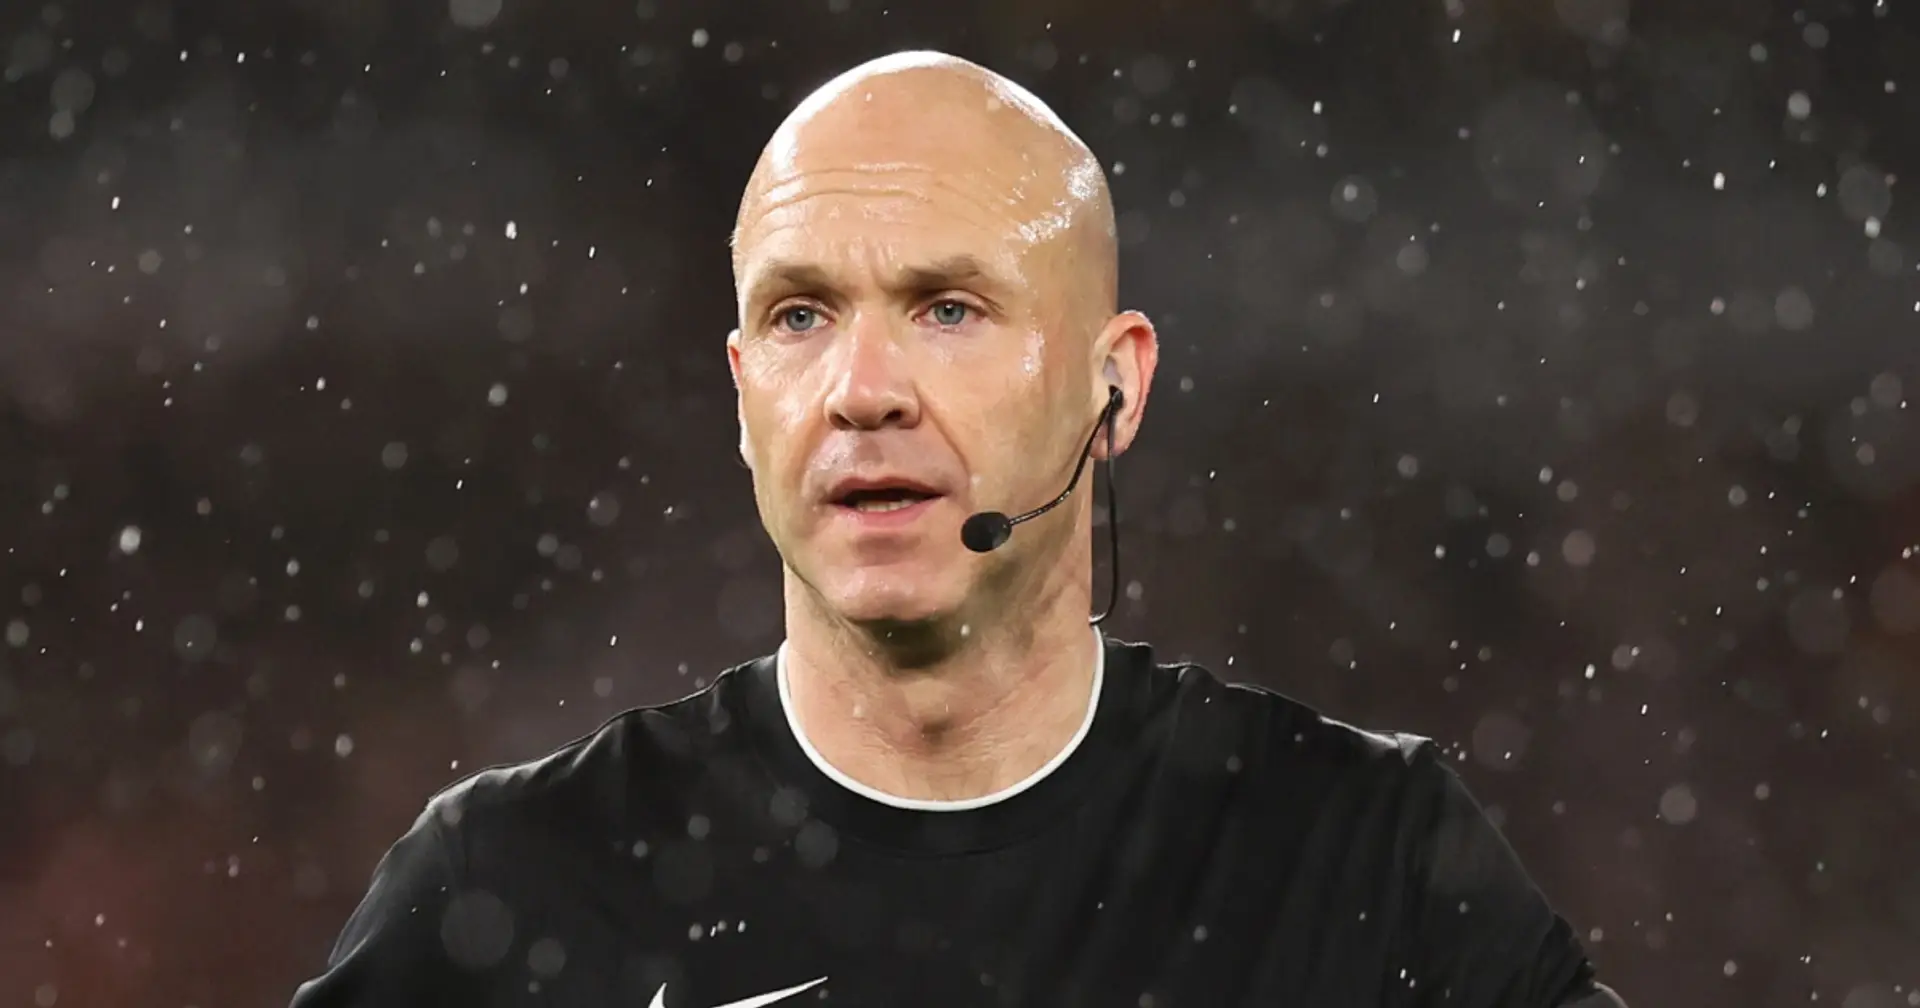 Anthony Taylor demoted from Premier League to Championship - but there's a catch